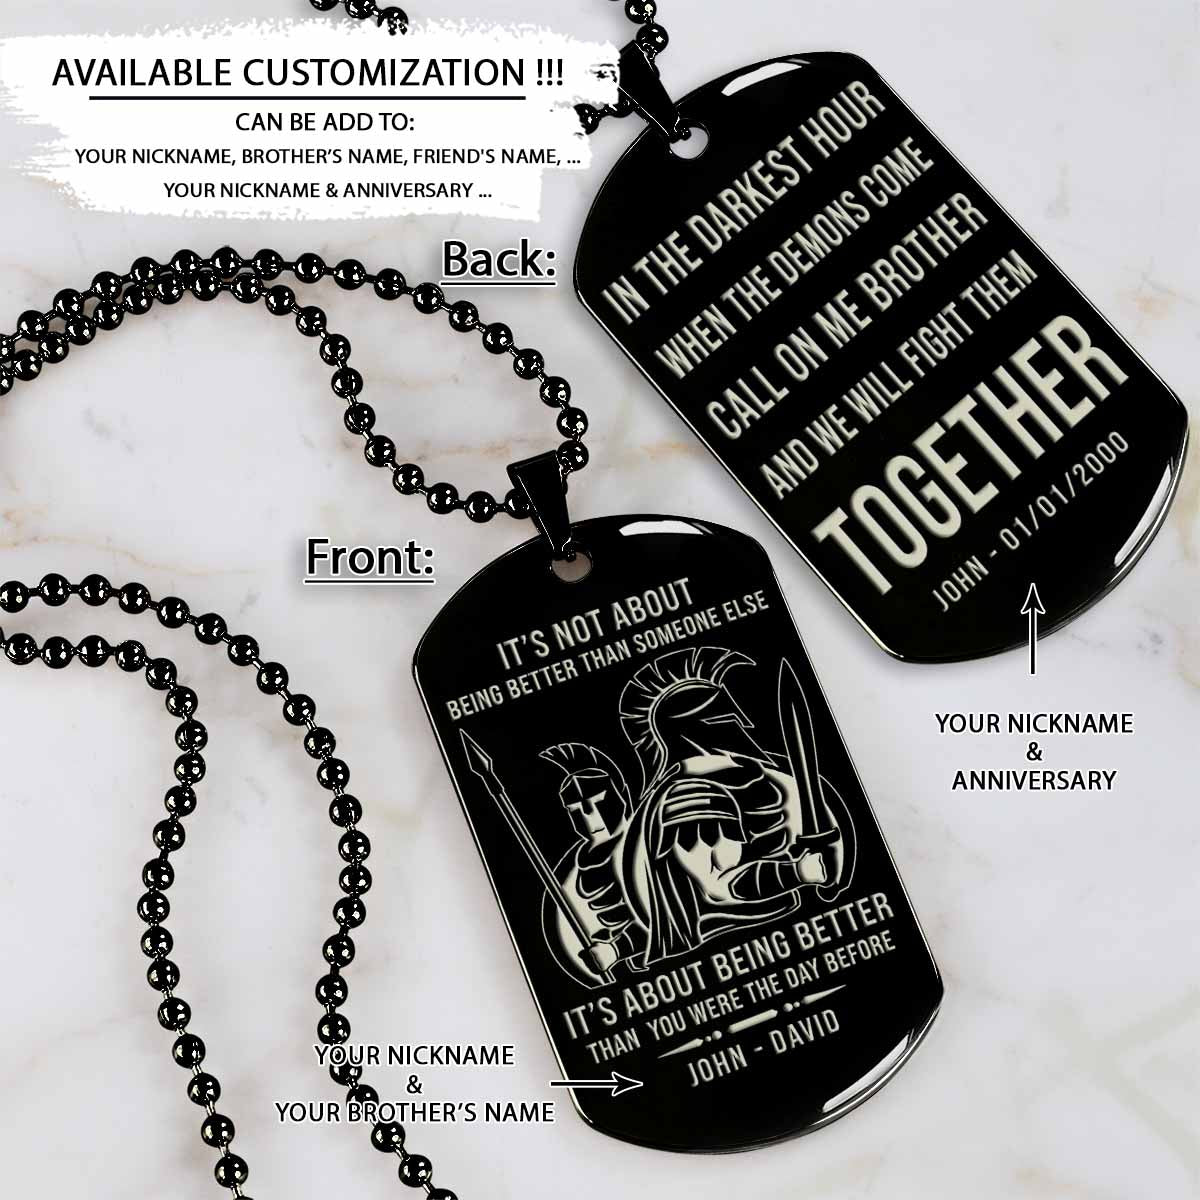 WAD061 - Call On Me Brother - It's Not About Being Better Than Someone Else - Warrior - Spartan Necklace - Engrave Black Dog Tag